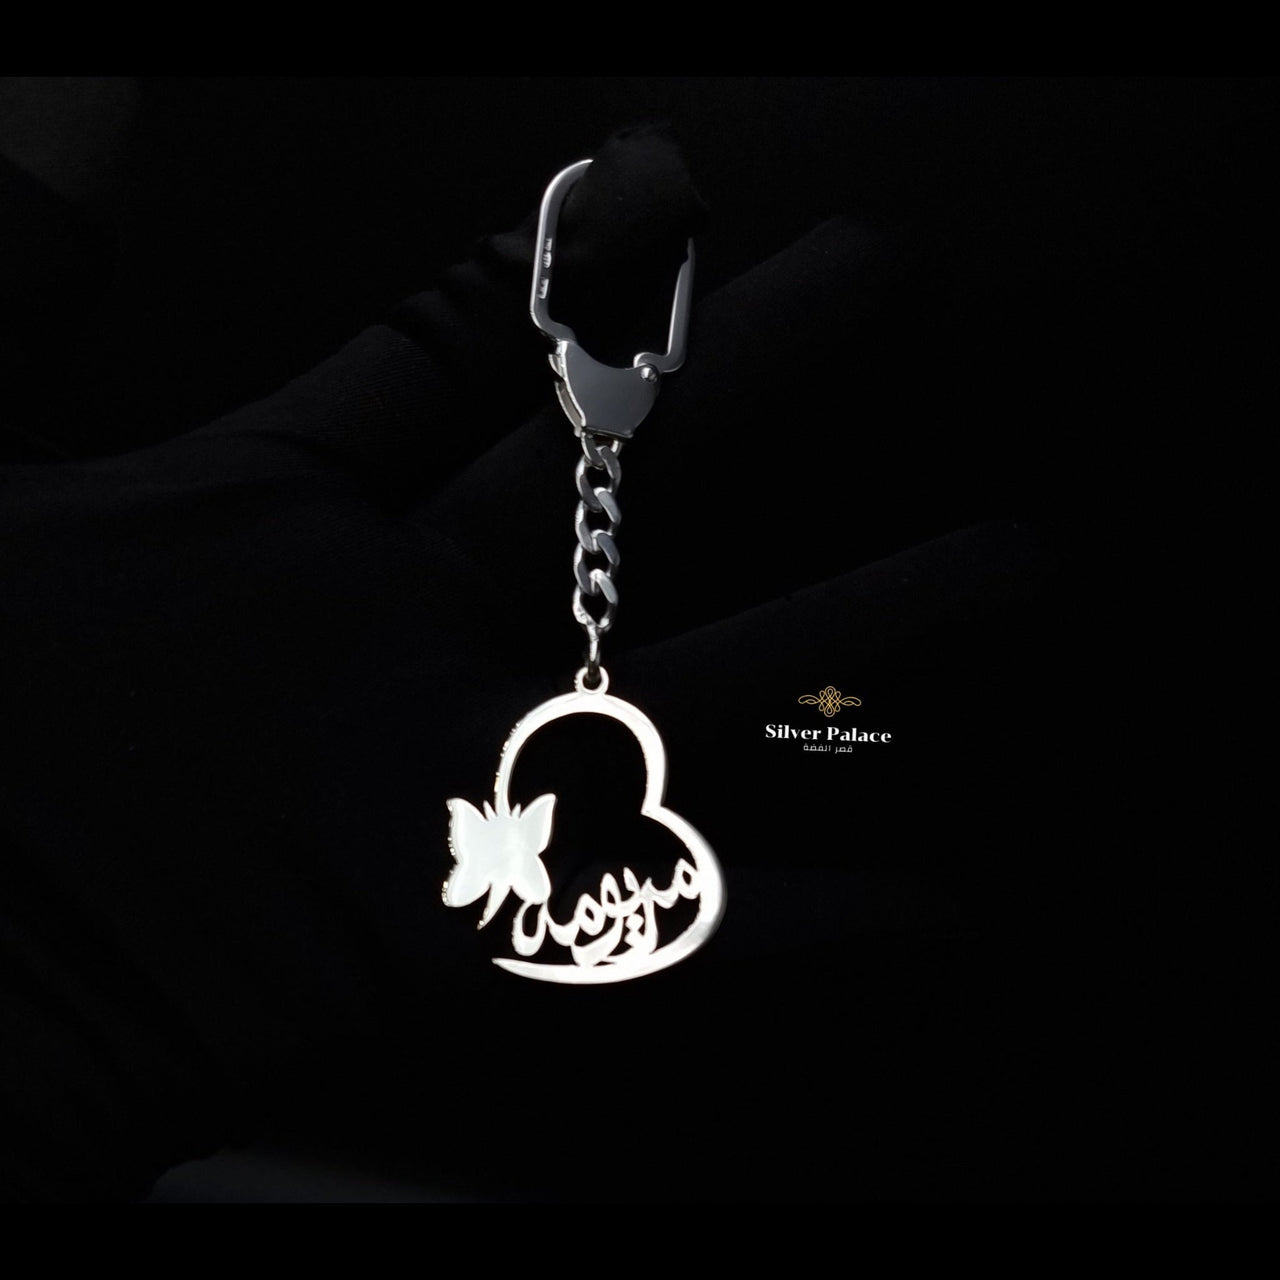 Hand-made personalized Heart & Butterfly keychain